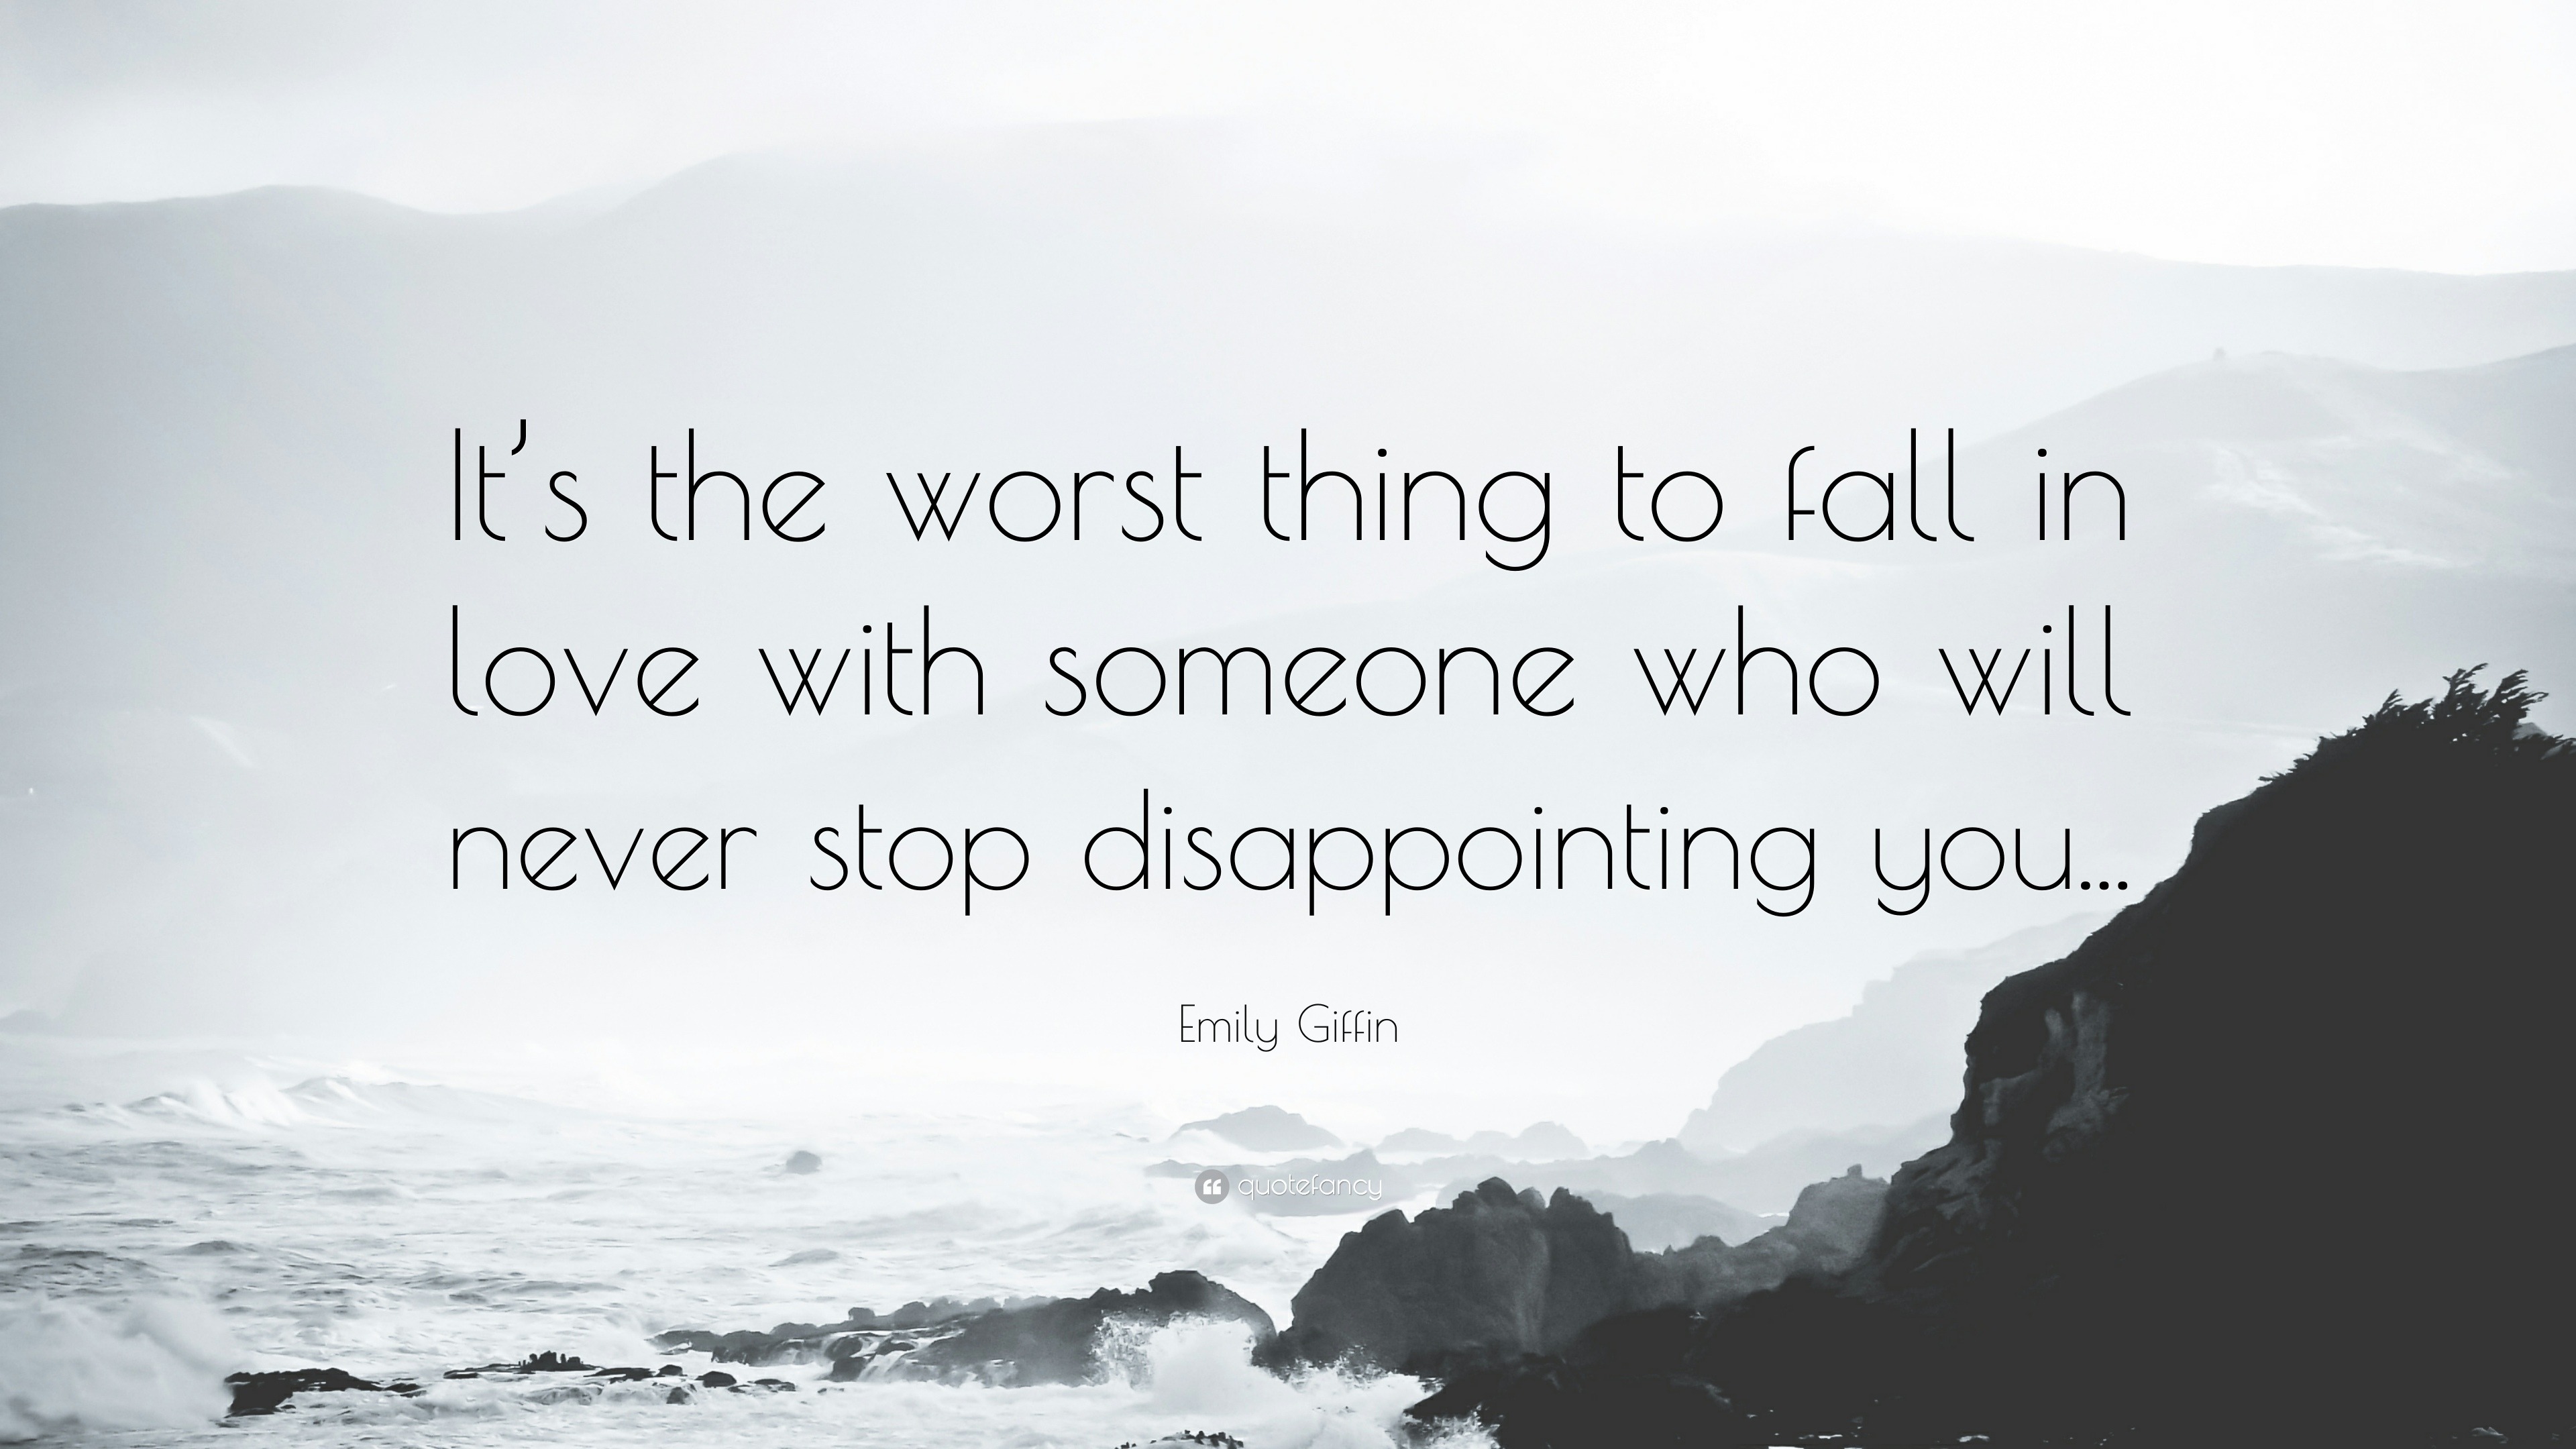 Emily Giffin Quote “It s the worst thing to fall in love with someone who